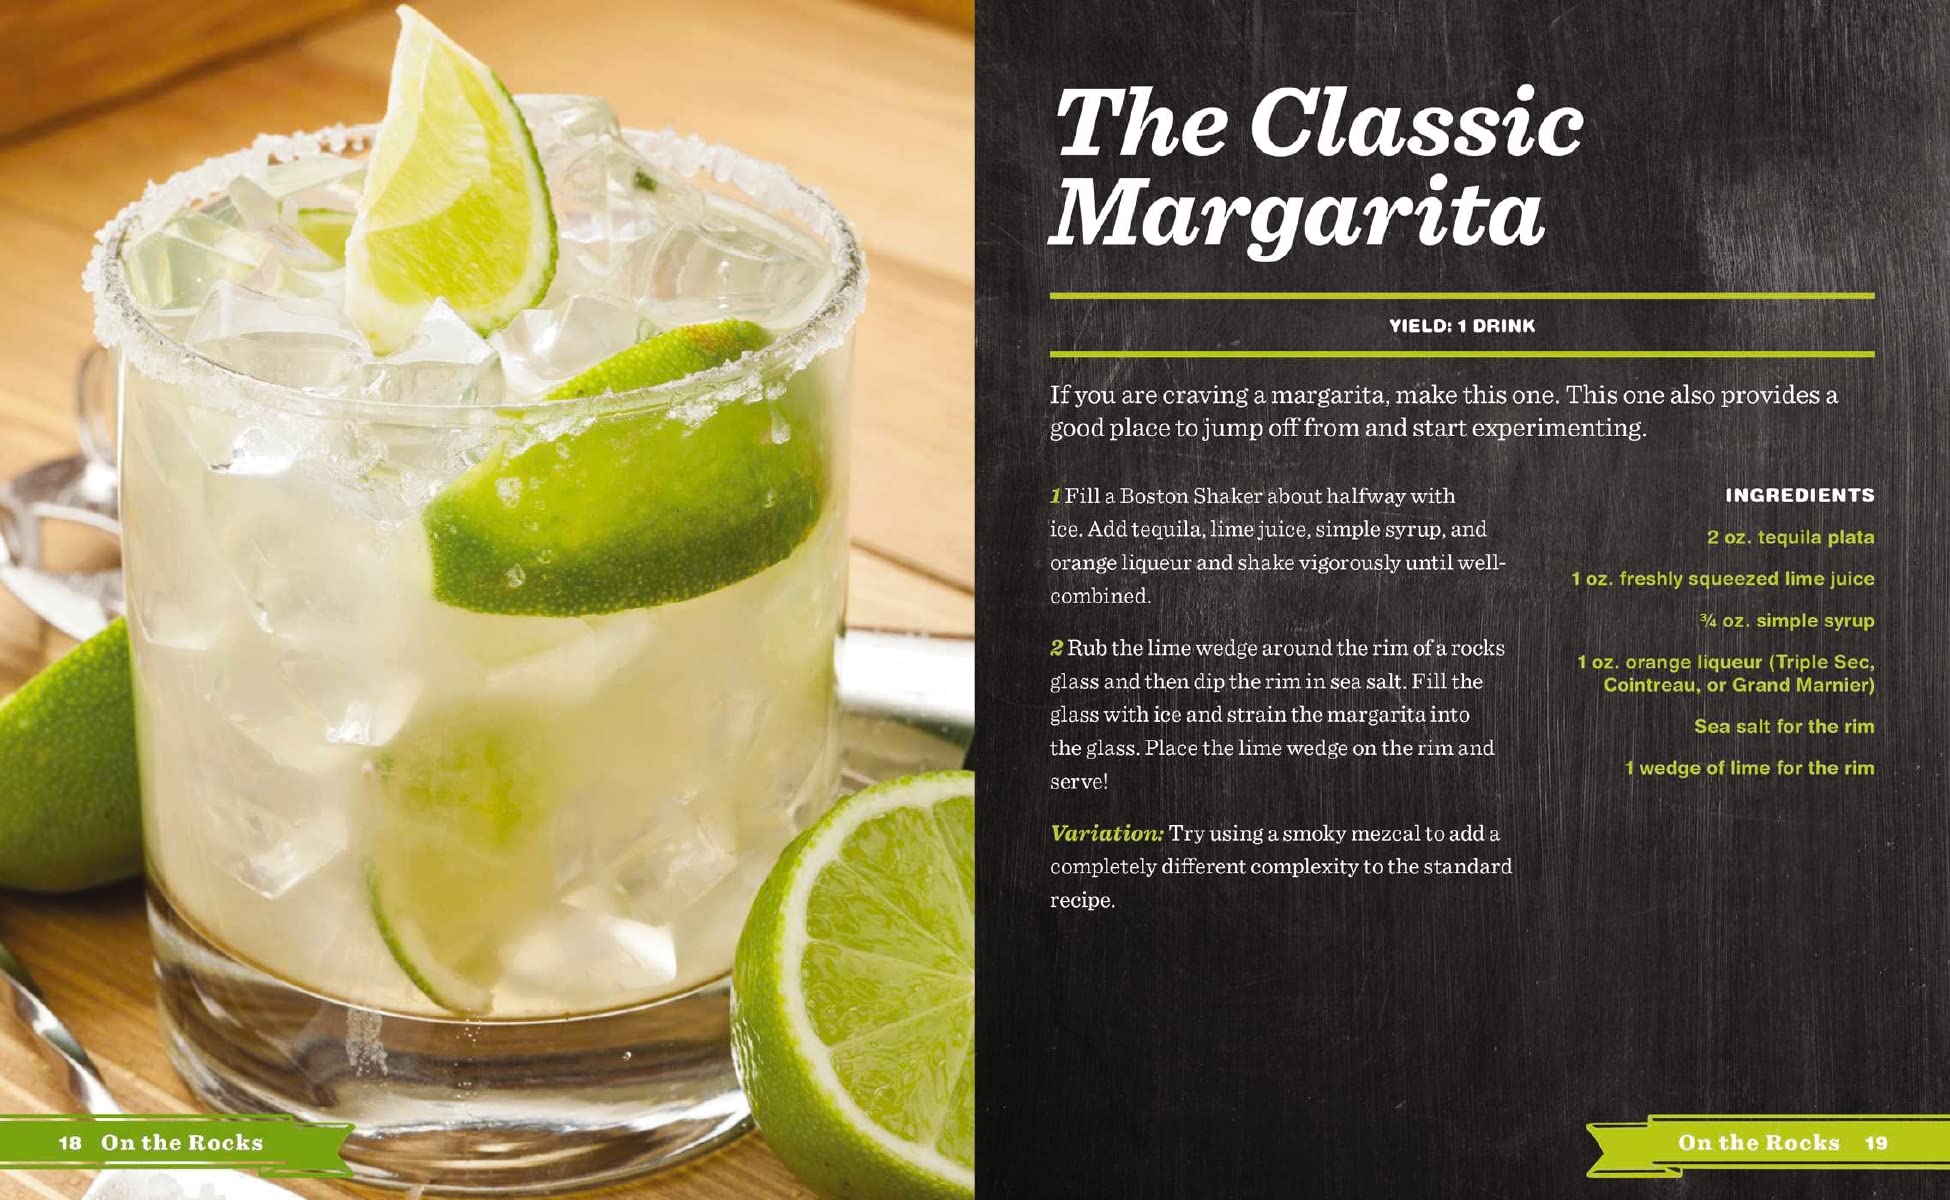 Margaritas: Frozen, Spicy, and Bubbly - Over 100 Drinks for Everyone! (Mexican Cocktails, Cinco de Mayo Beverages, Specific Cocktails, Vacation Drinking) (The Art of Entertaining)